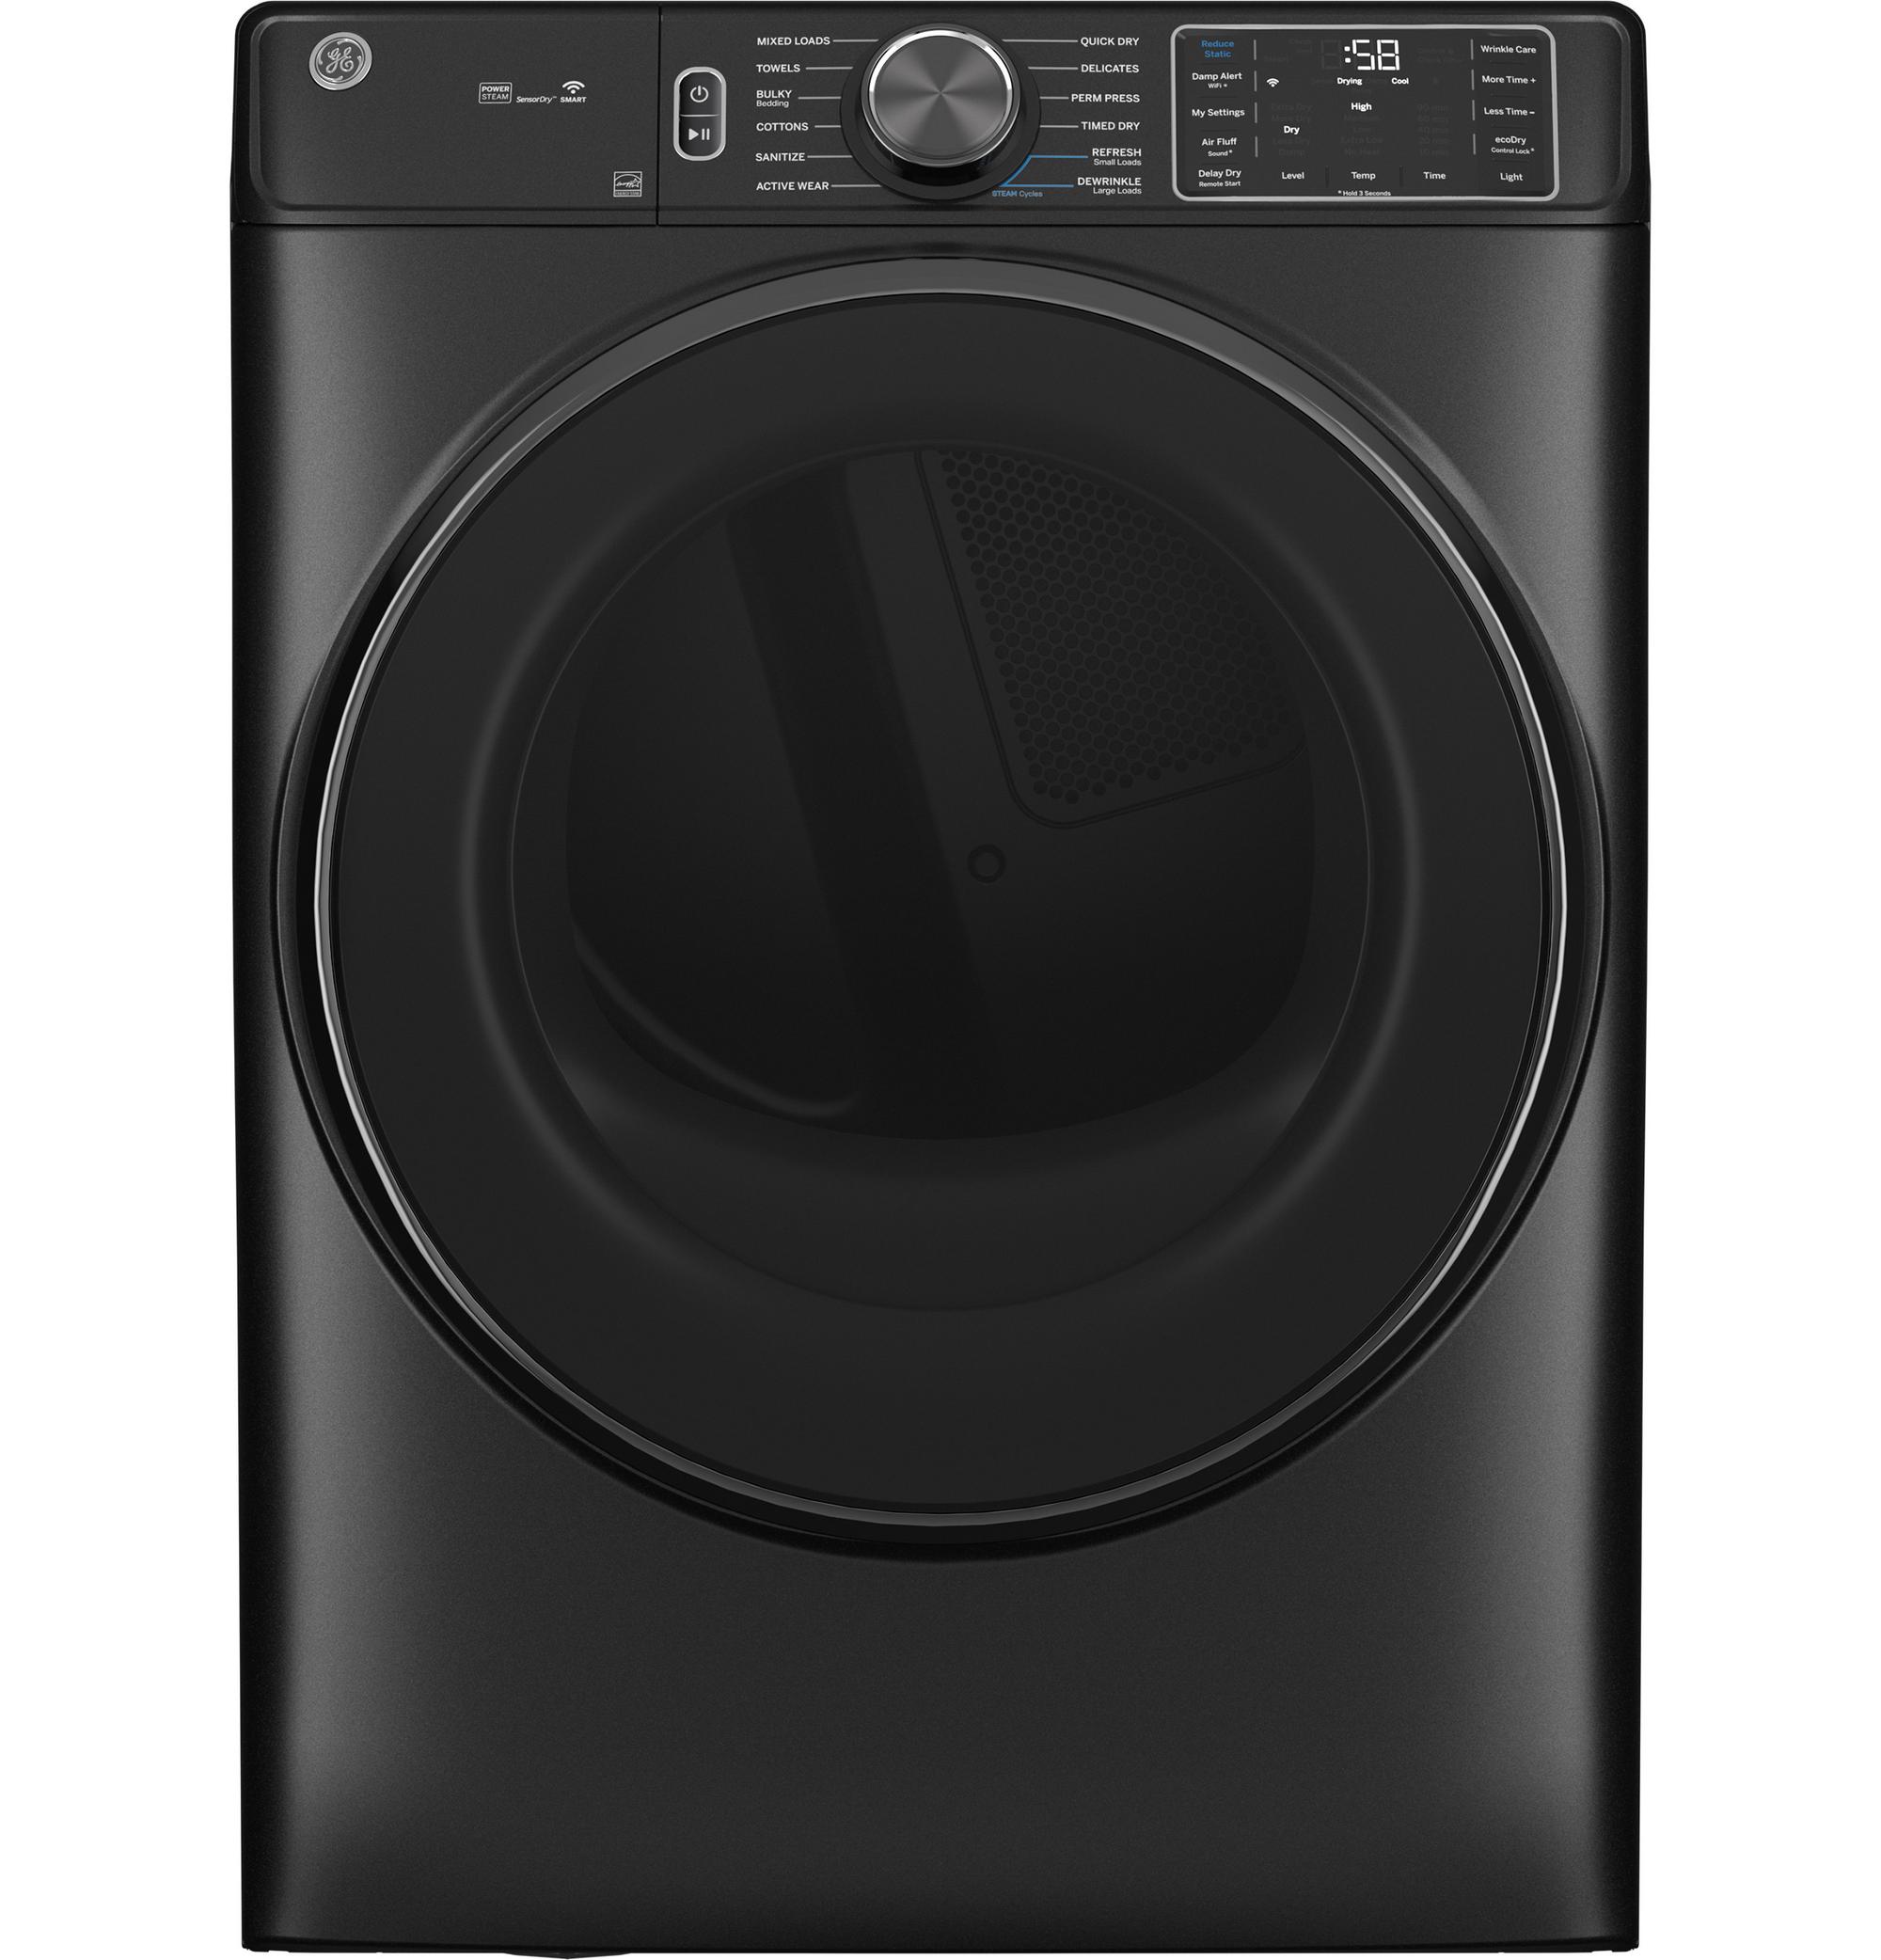 Rent to Own GE Appliances Space Saving 2.8 cu. ft. Portable Washer & 3.6  cu. ft. 120V Portable Electric Dryer at Aaron's today!